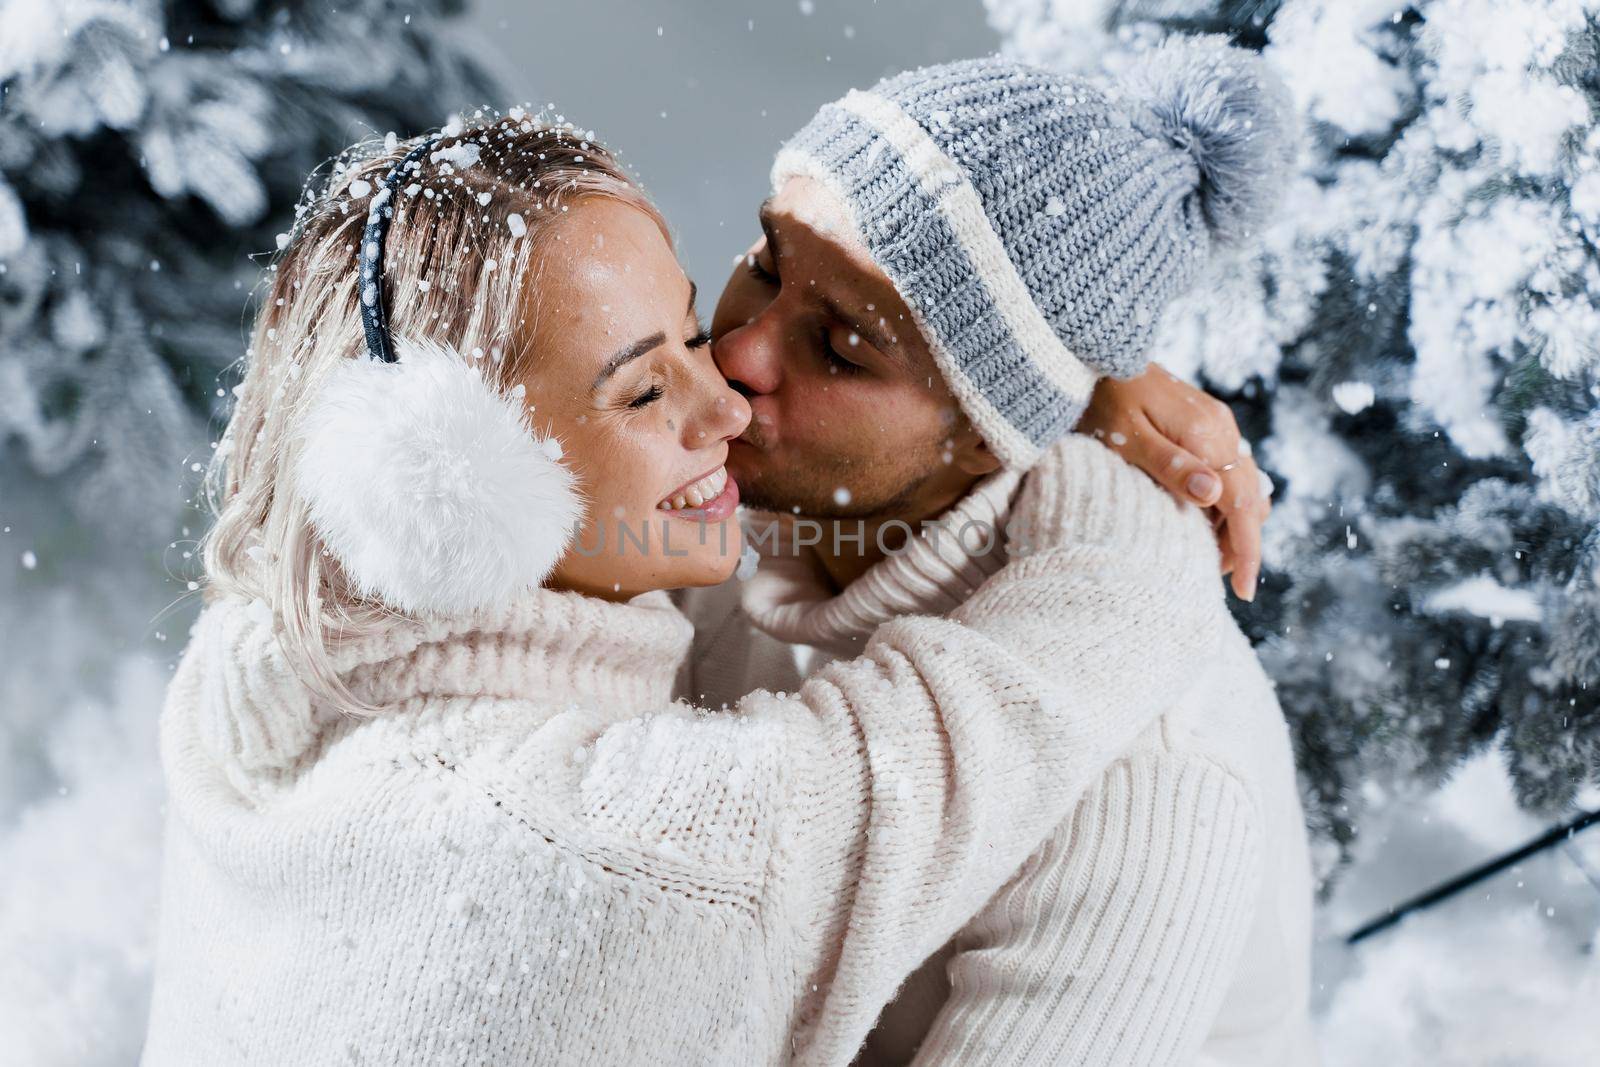 Winter love story at the eve of new year celebration. Couple hugging near christmass trees. Winter holidays. Love story of young couple weared white pullovers. Happy man and woman love each other.